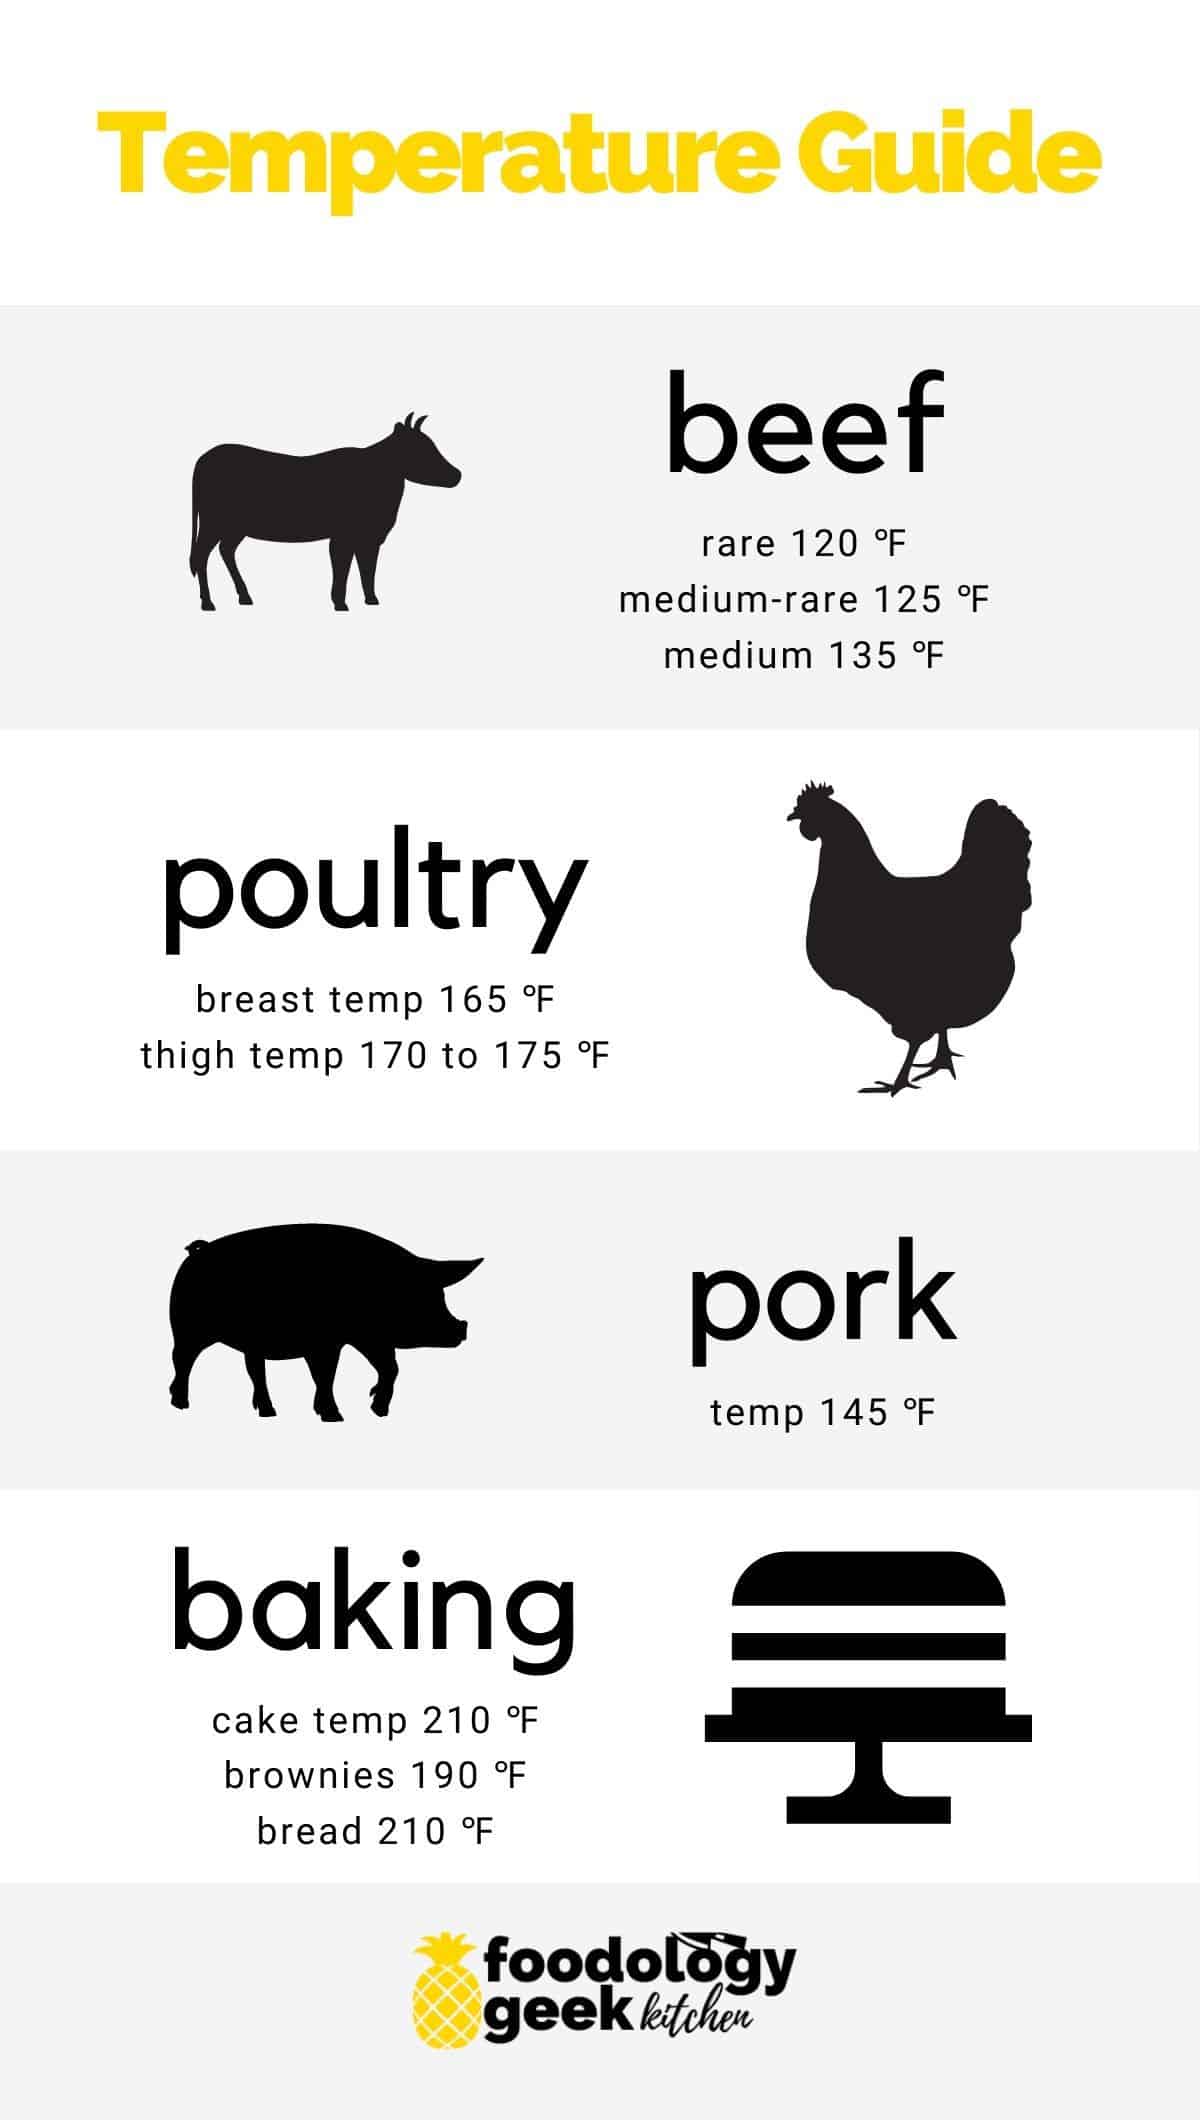 Meat Temperature Chart